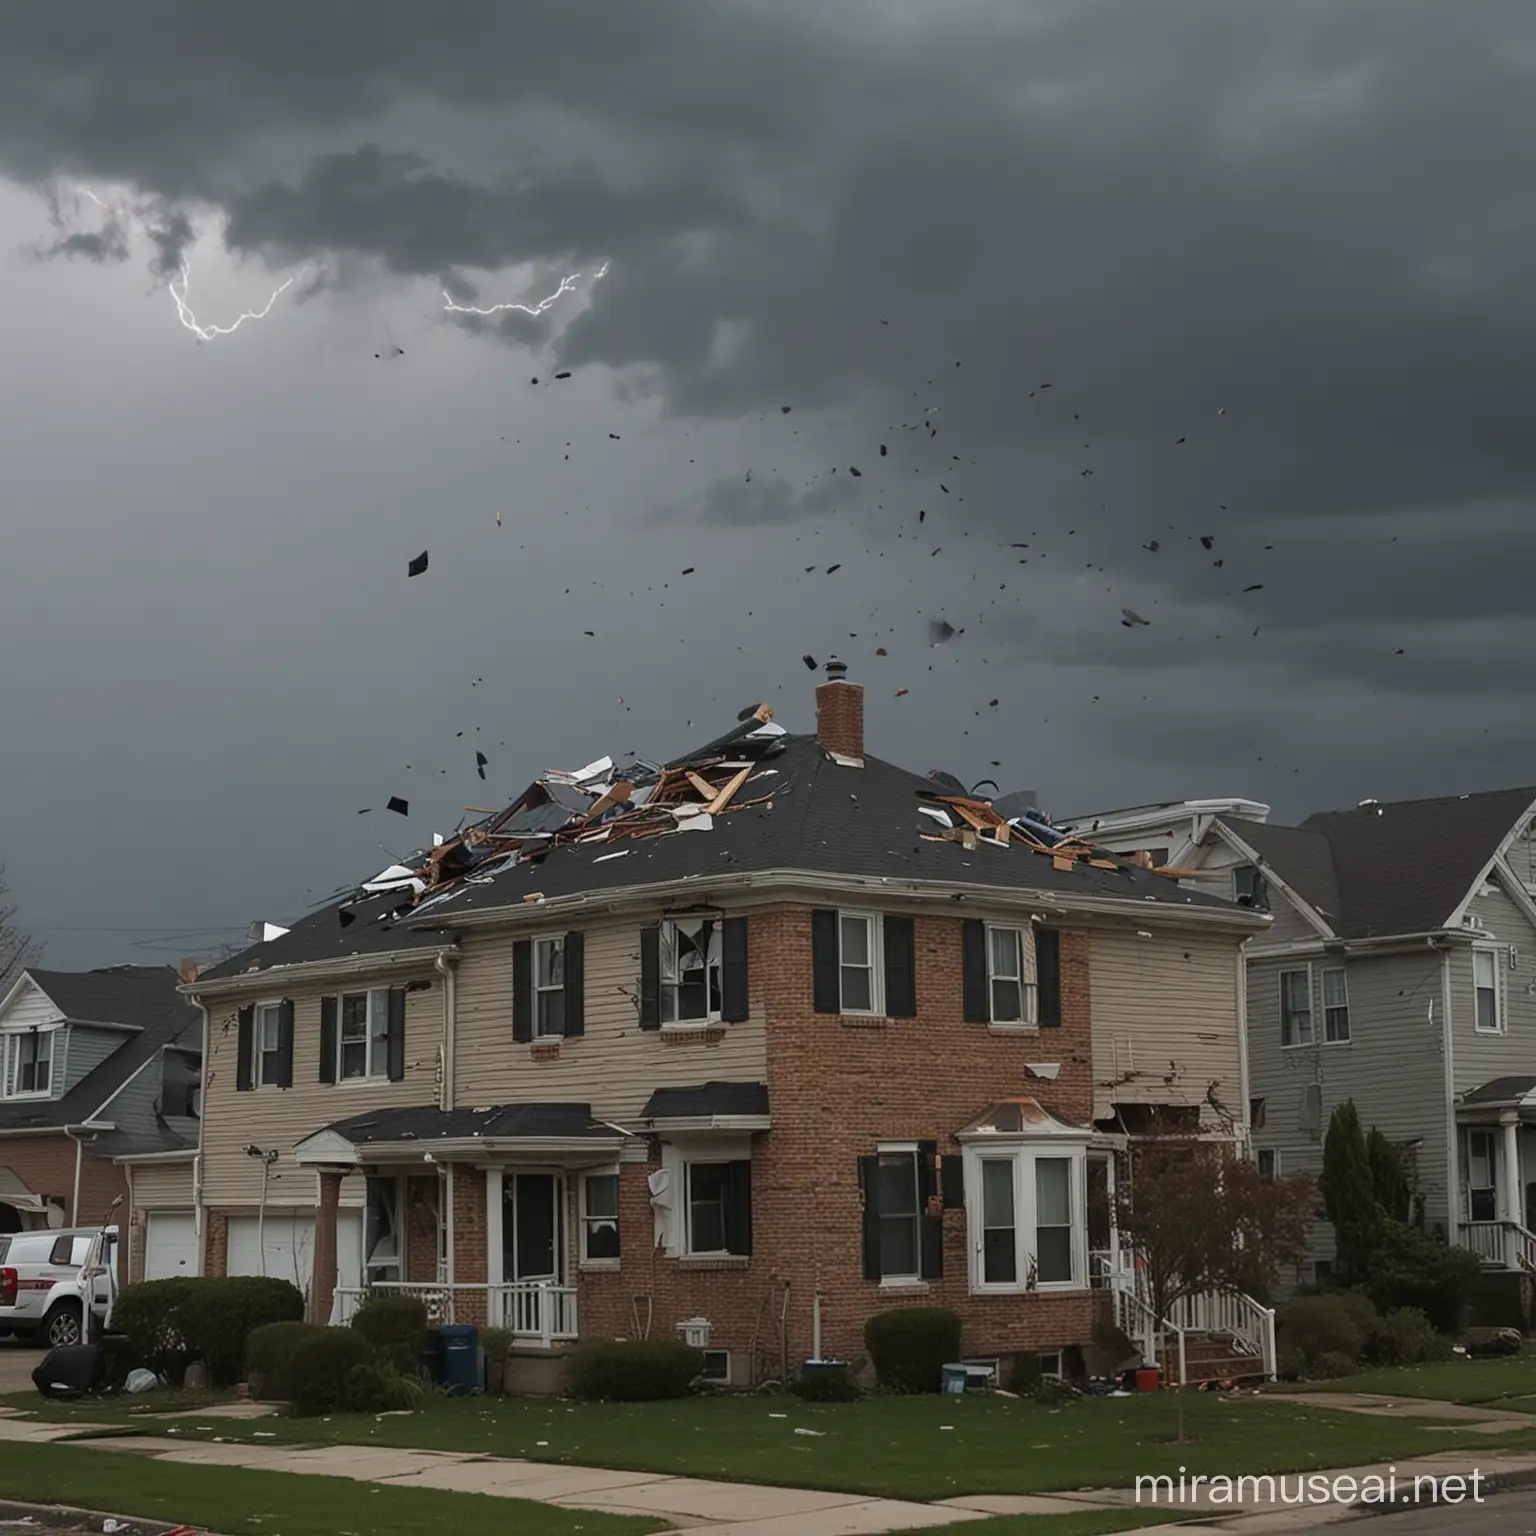 Unexpected Storm Neighborhood Reacts as Wind Rips House Roof